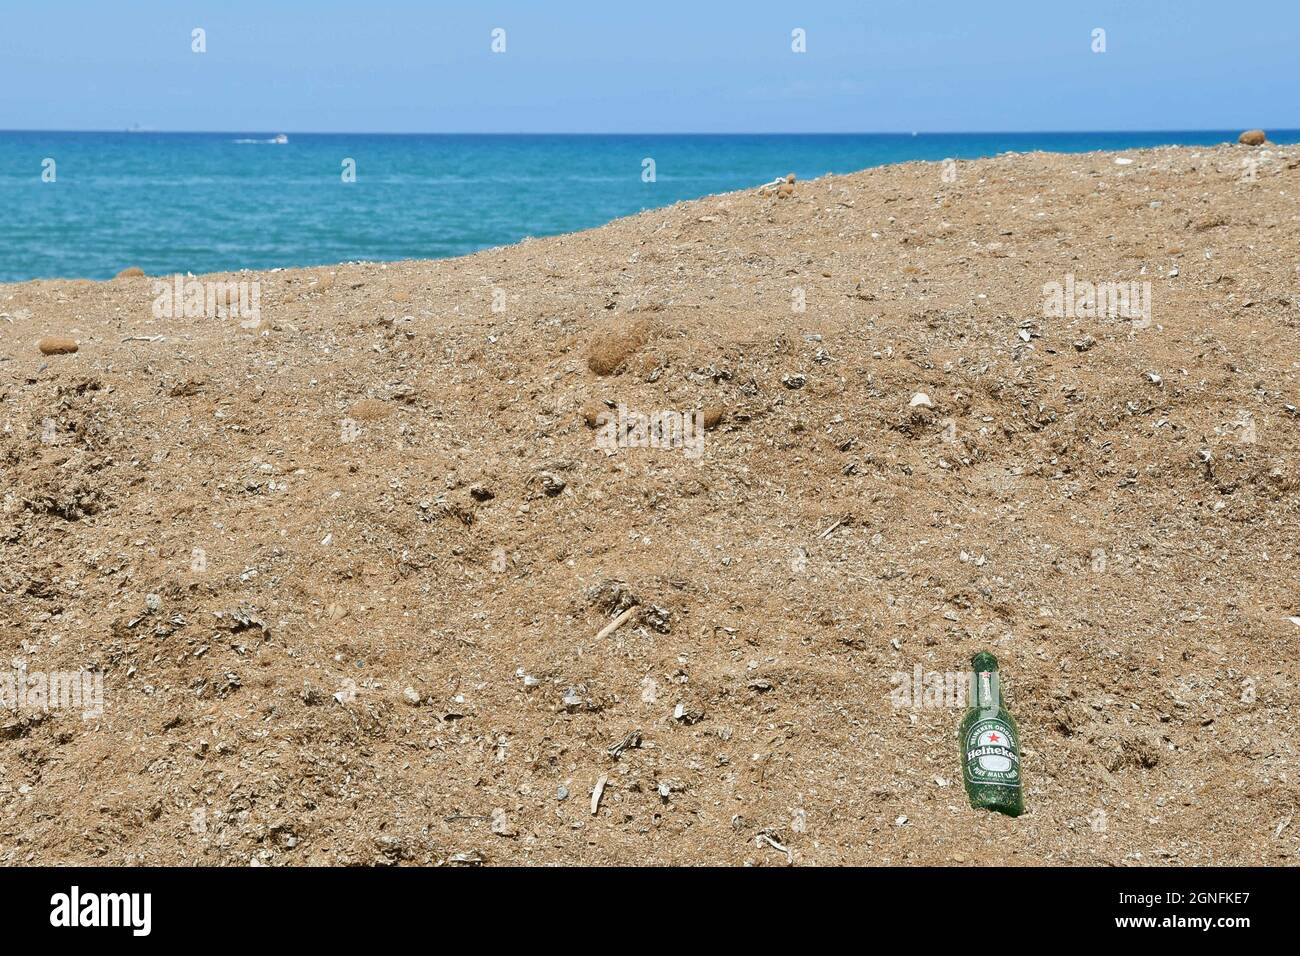 An empty beer bottle abandoned on the sandy shore with the sea in the background, environmental issue concept, San Vincenzo, Tuscany, Italy Stock Photo